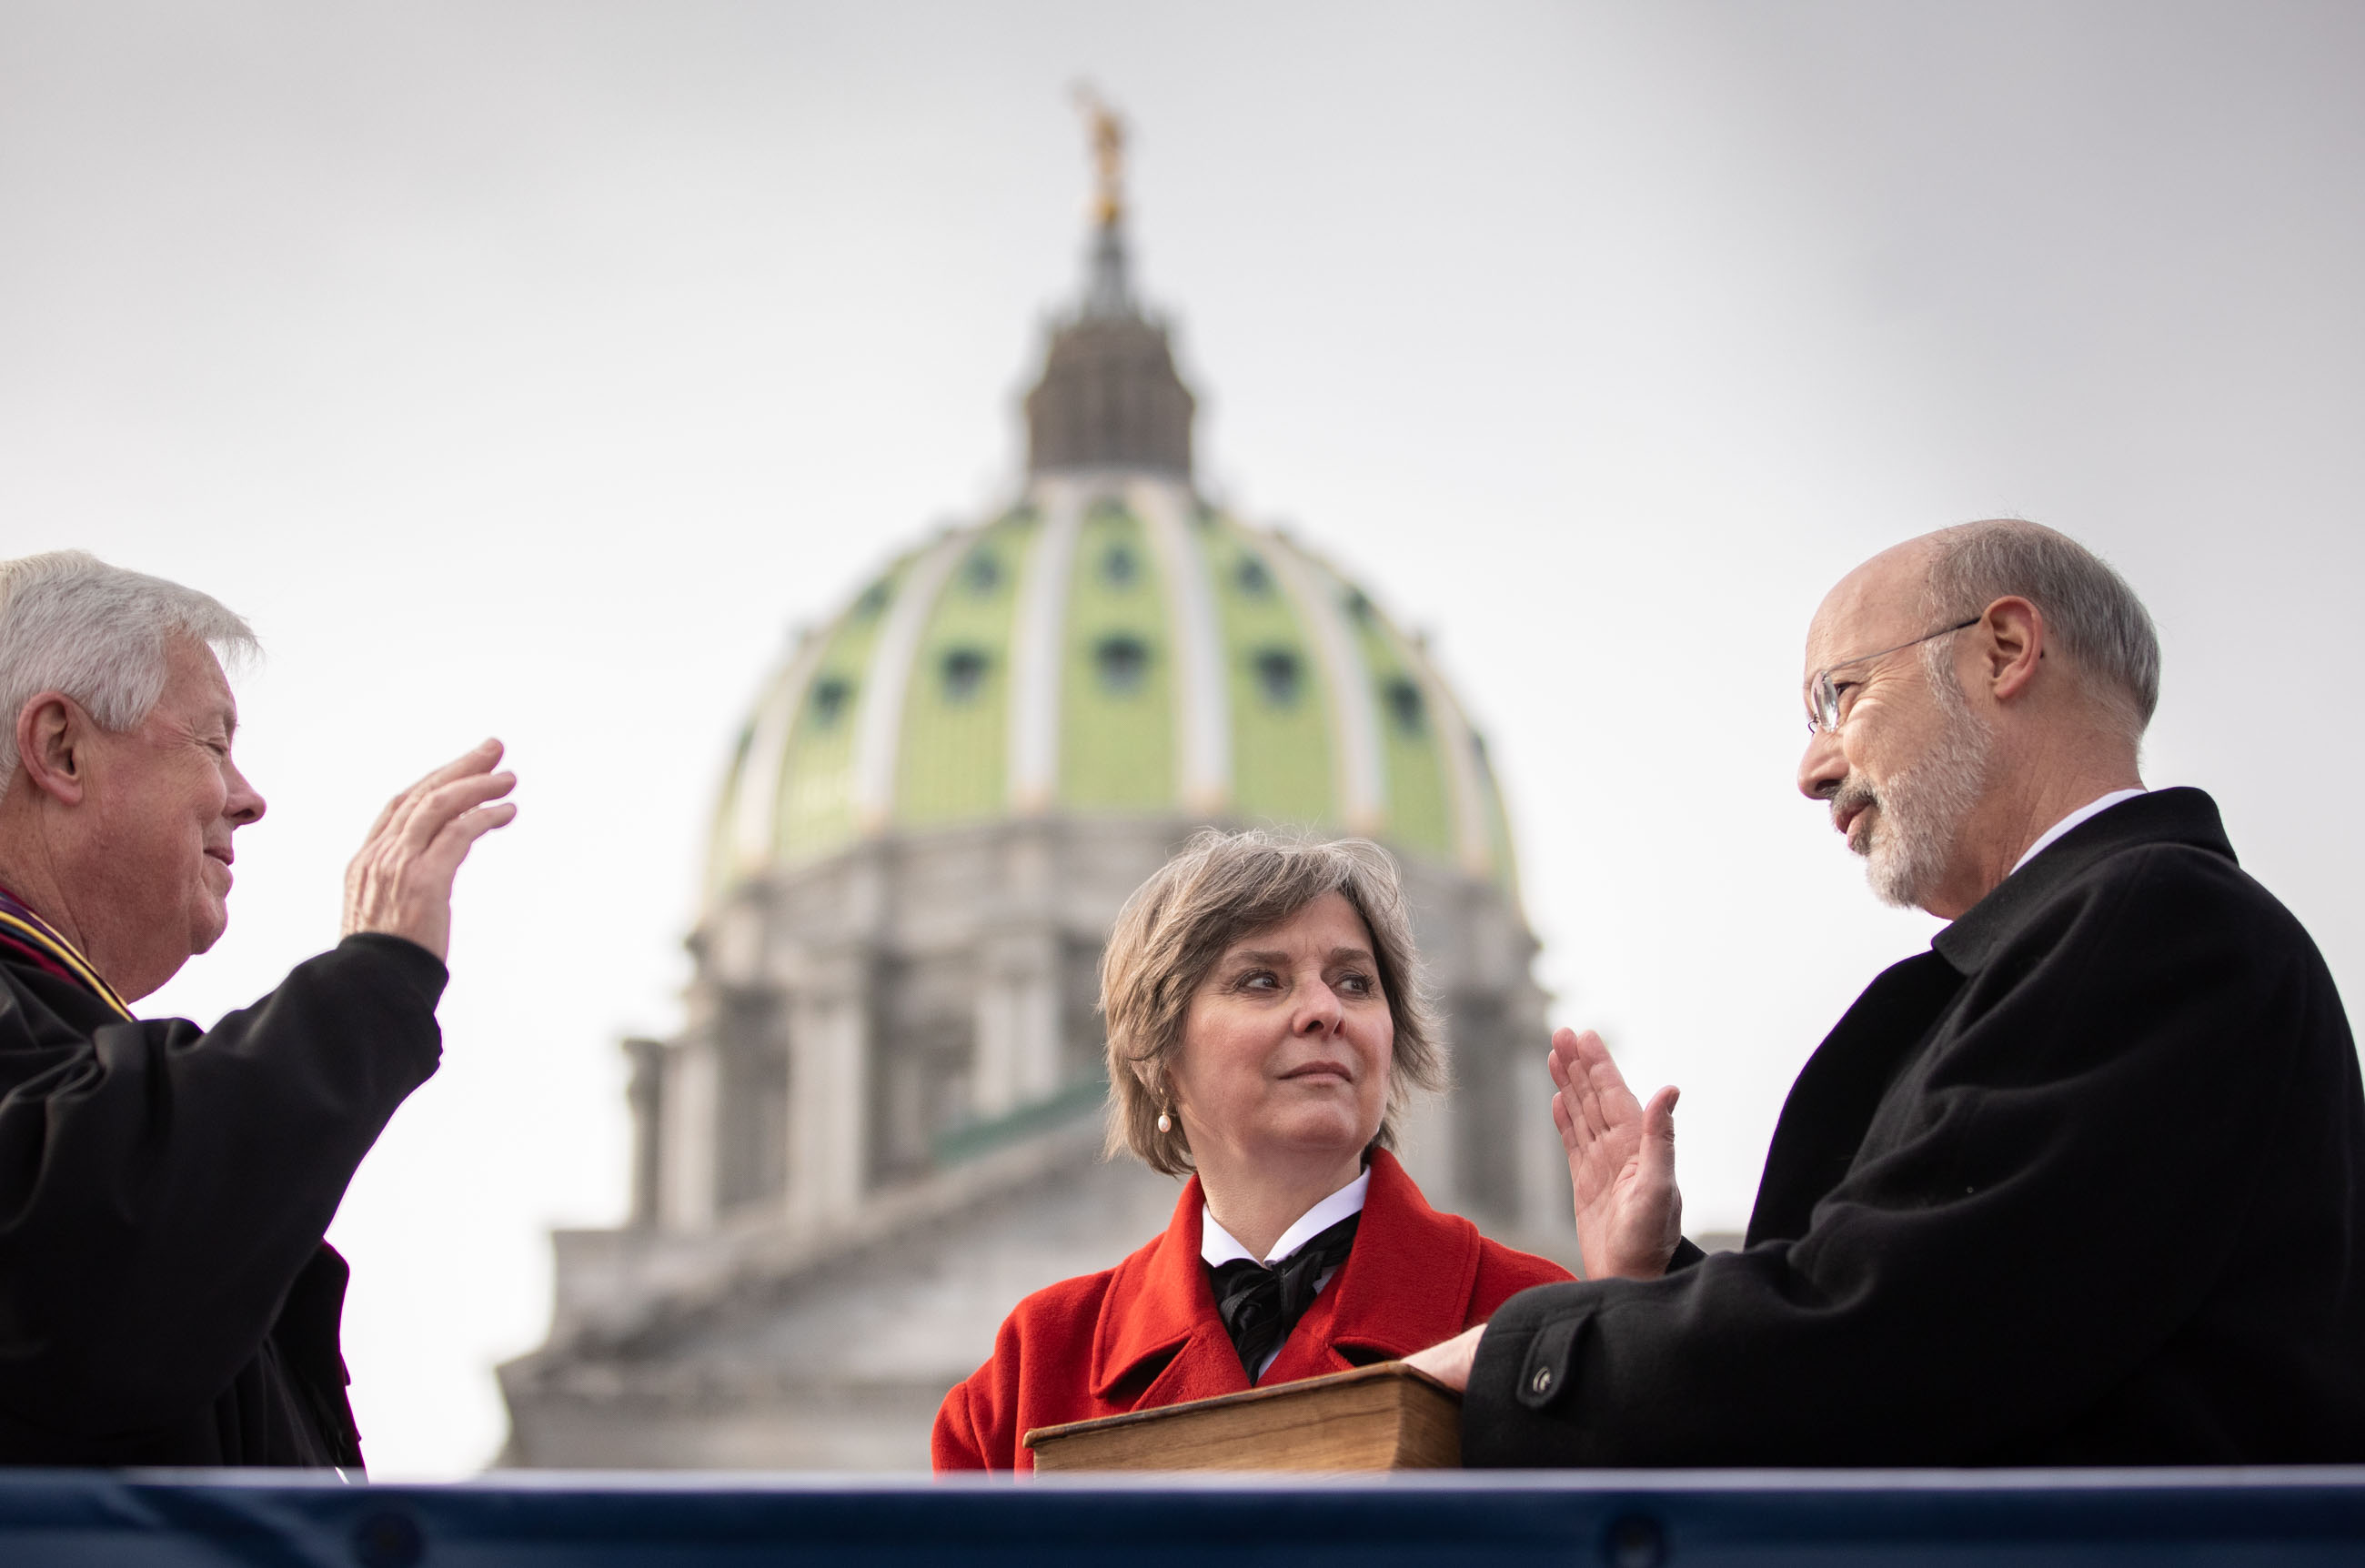 Governor Tom Wolf (right) with his wife, Frances Wolf (left) on stage at Pennsylvania's inauguration ceremony on Jan. 15th. Photo: PA Governor's Office.